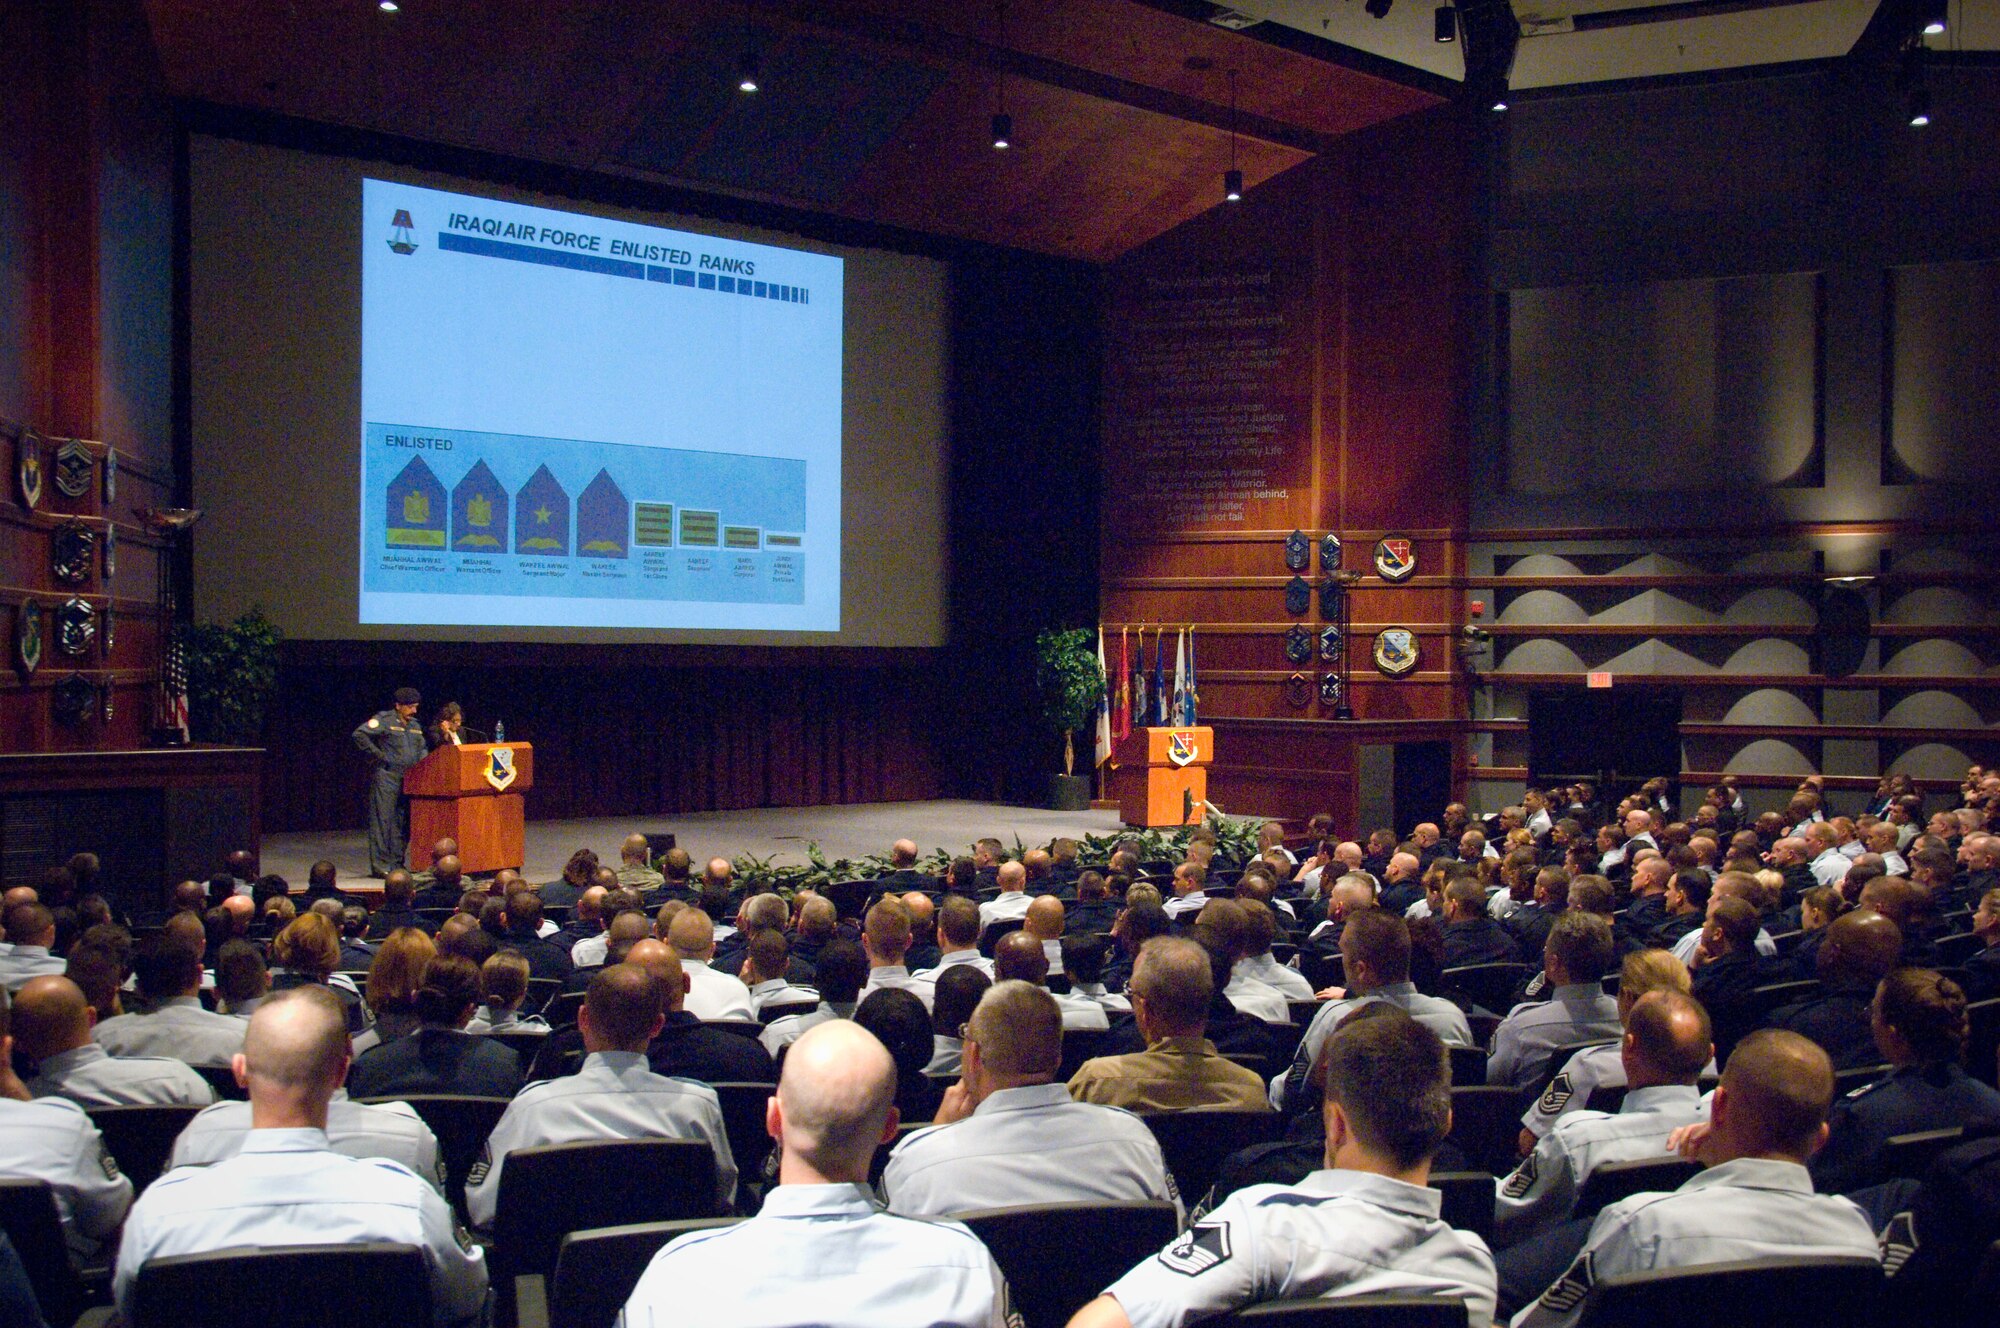 The Iraqi chief master sergeant of the Air Force speaks Dec. 7 at the U.S. Air Force’s Senior Noncommissioned Officer Academy at Maxwell Air Force Base, Ala. During the visit, his first to the States, the chief heard from the Academy and other elements of Air University, regarding how the U.S. Air Force educates its Airmen across the spectrum of ranks. The chief was scheduled to make stops at other Air Education and Training Command bases during his time in the U.S. (U.S. Air Force photo/Melanie Rodgers Cox)